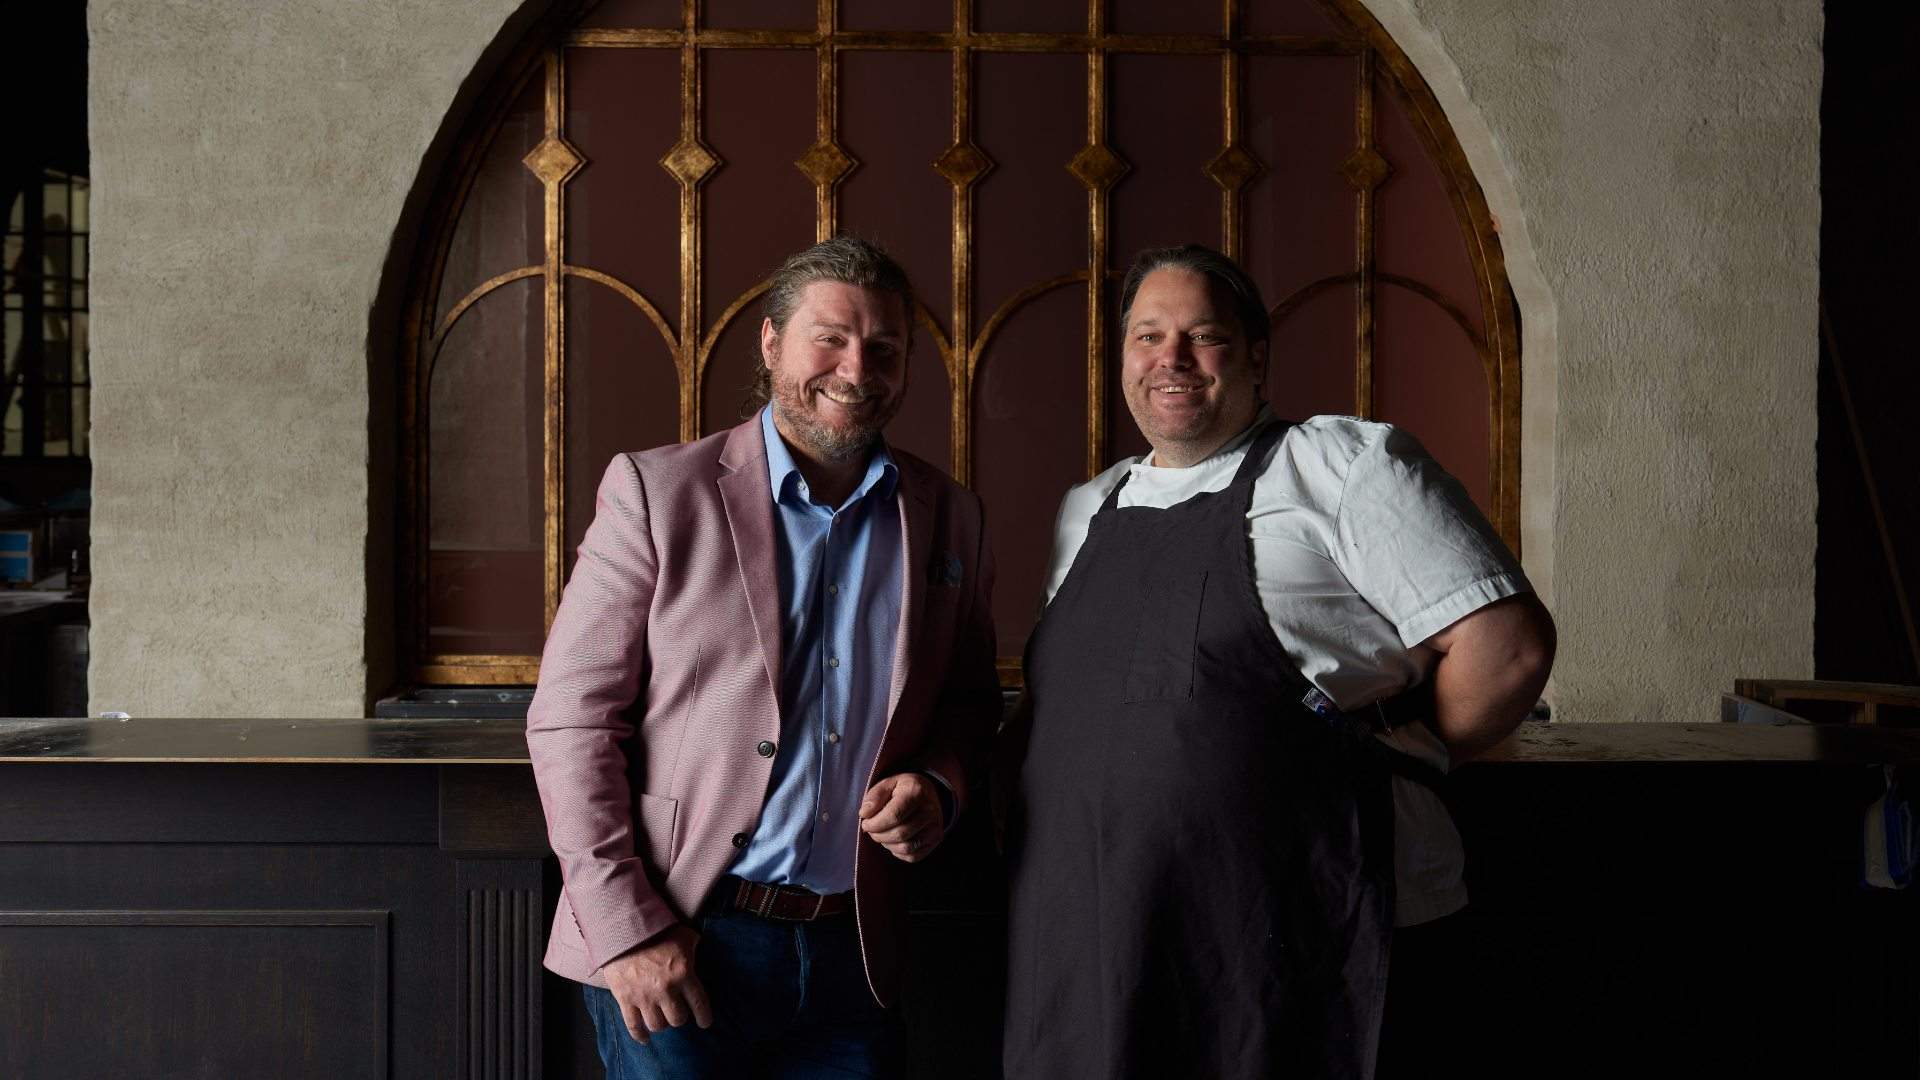 Chancery Lane Is the New Euro-Accented Bistro from Chef Scott Pickett in a Historic CBD Building